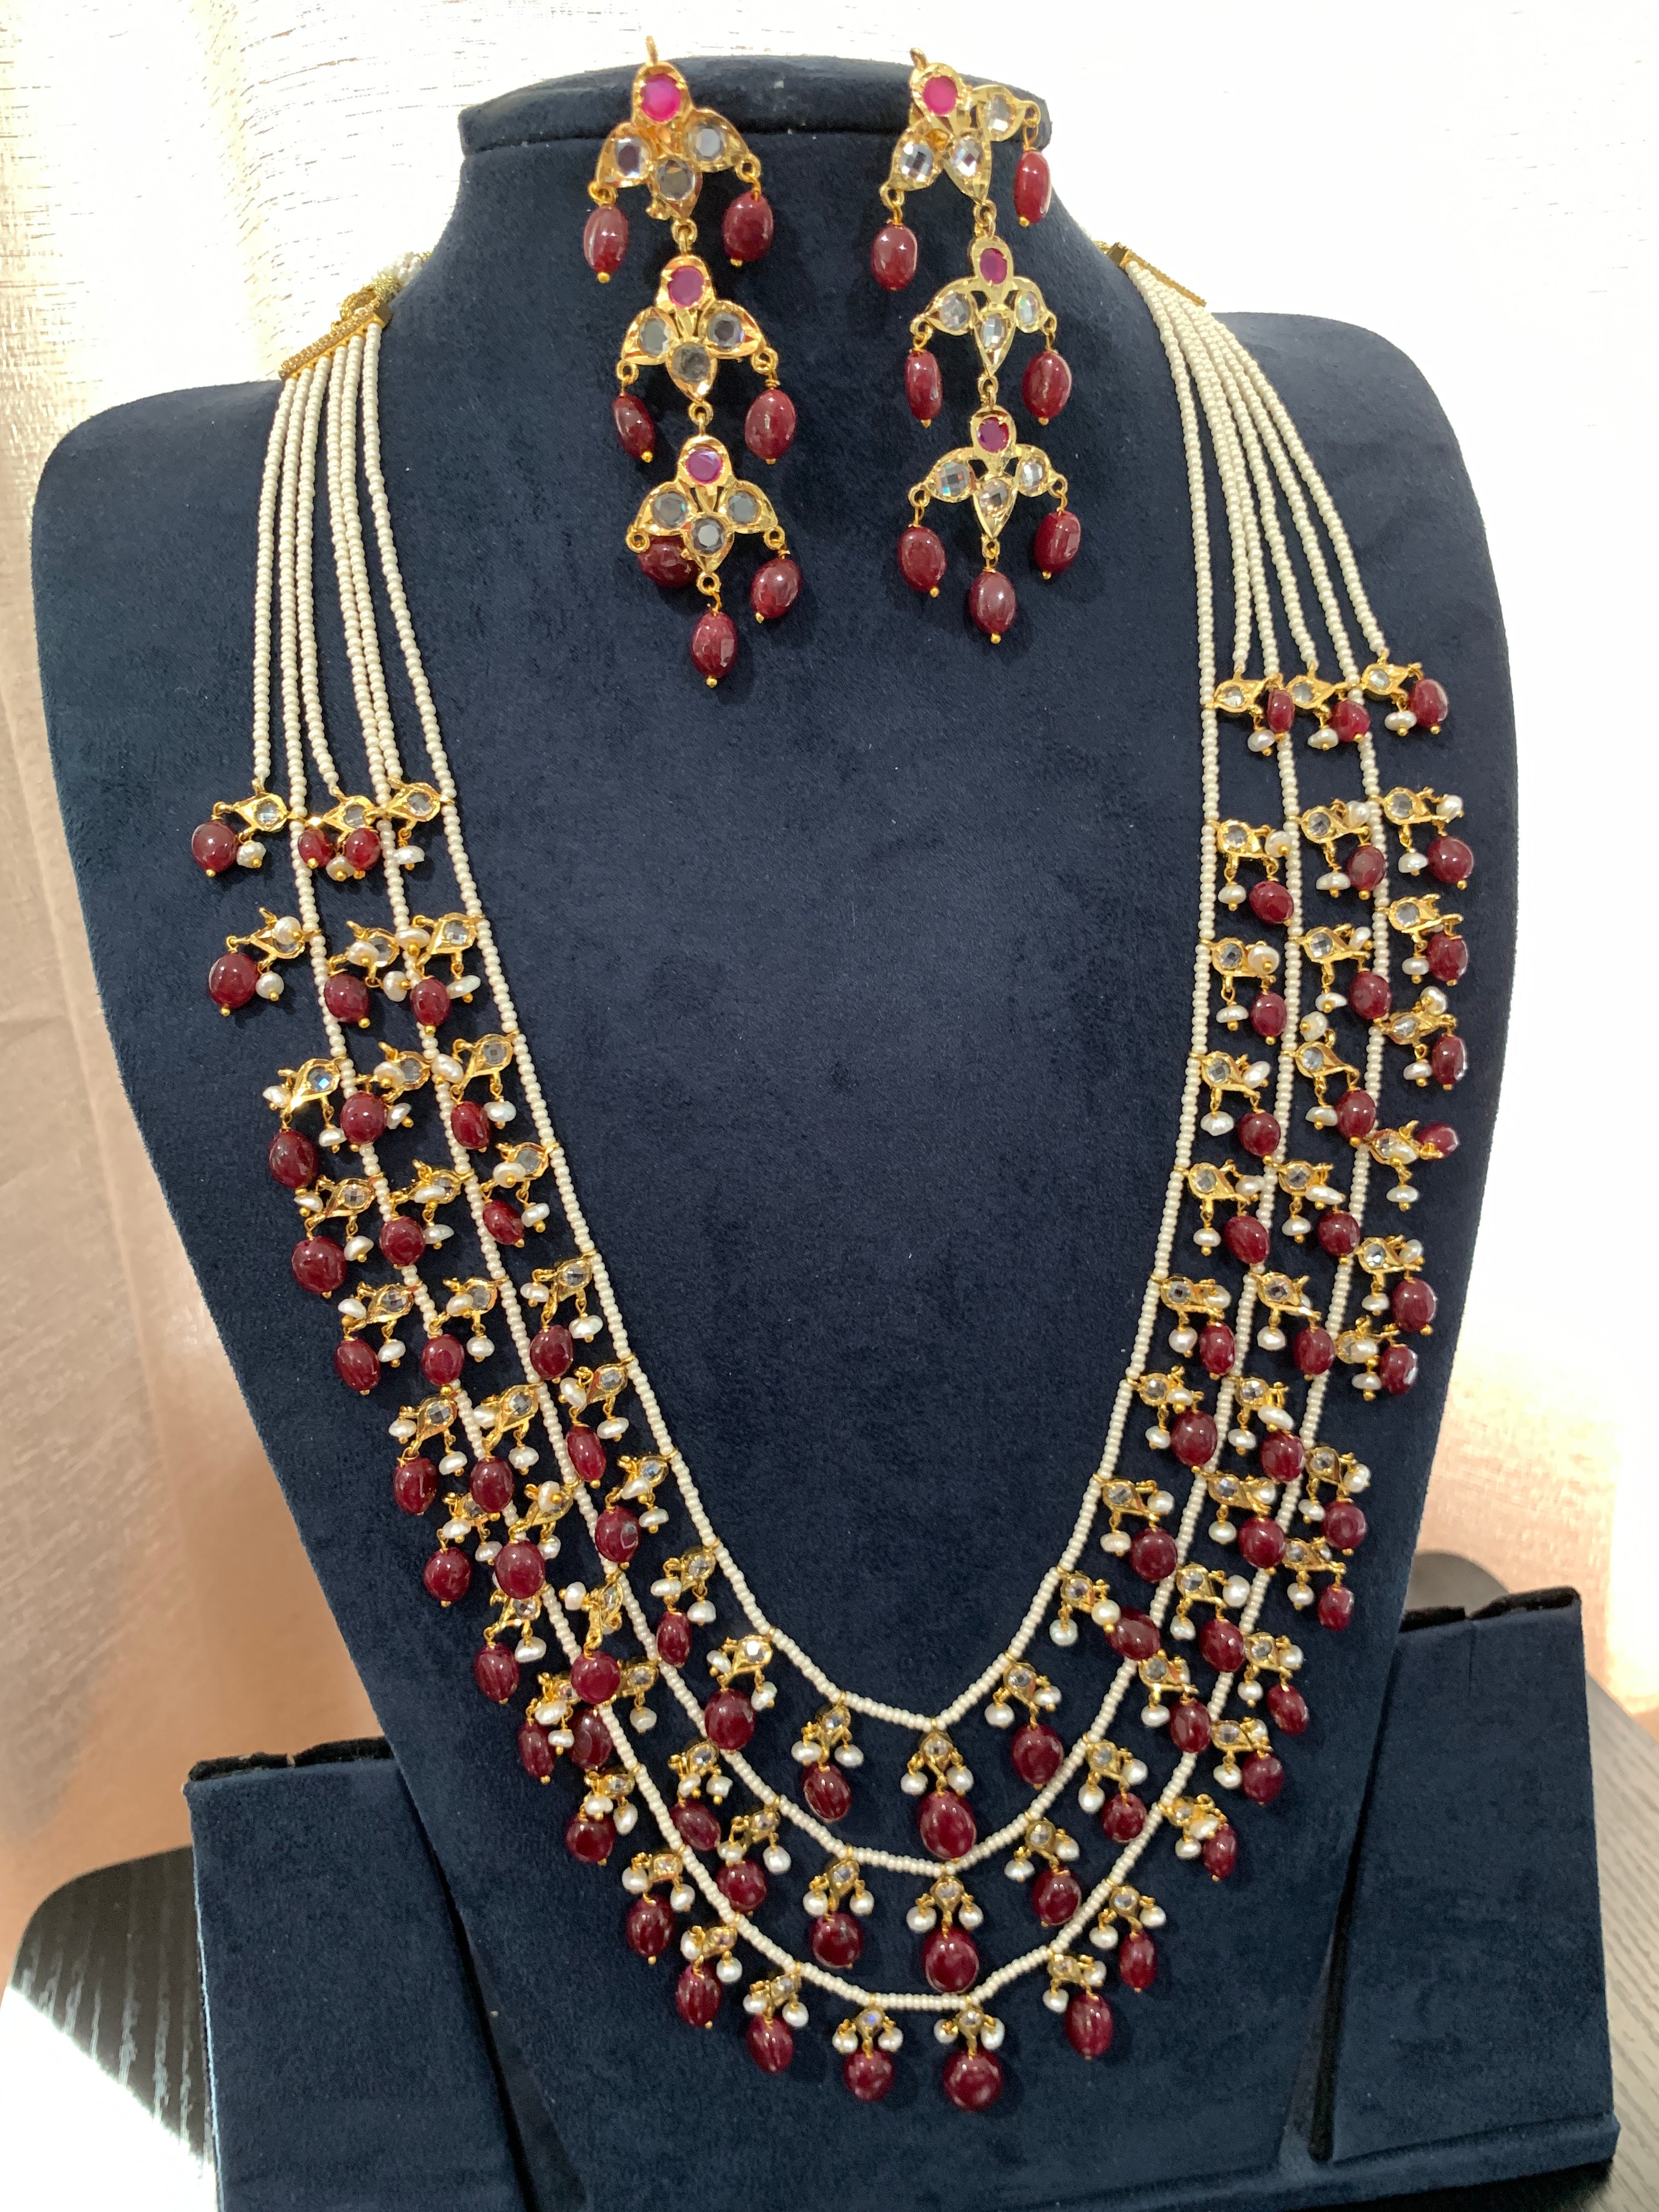 Buy Silk Beads Necklace set in Black and Peach Online! – Khushi Handicrafts